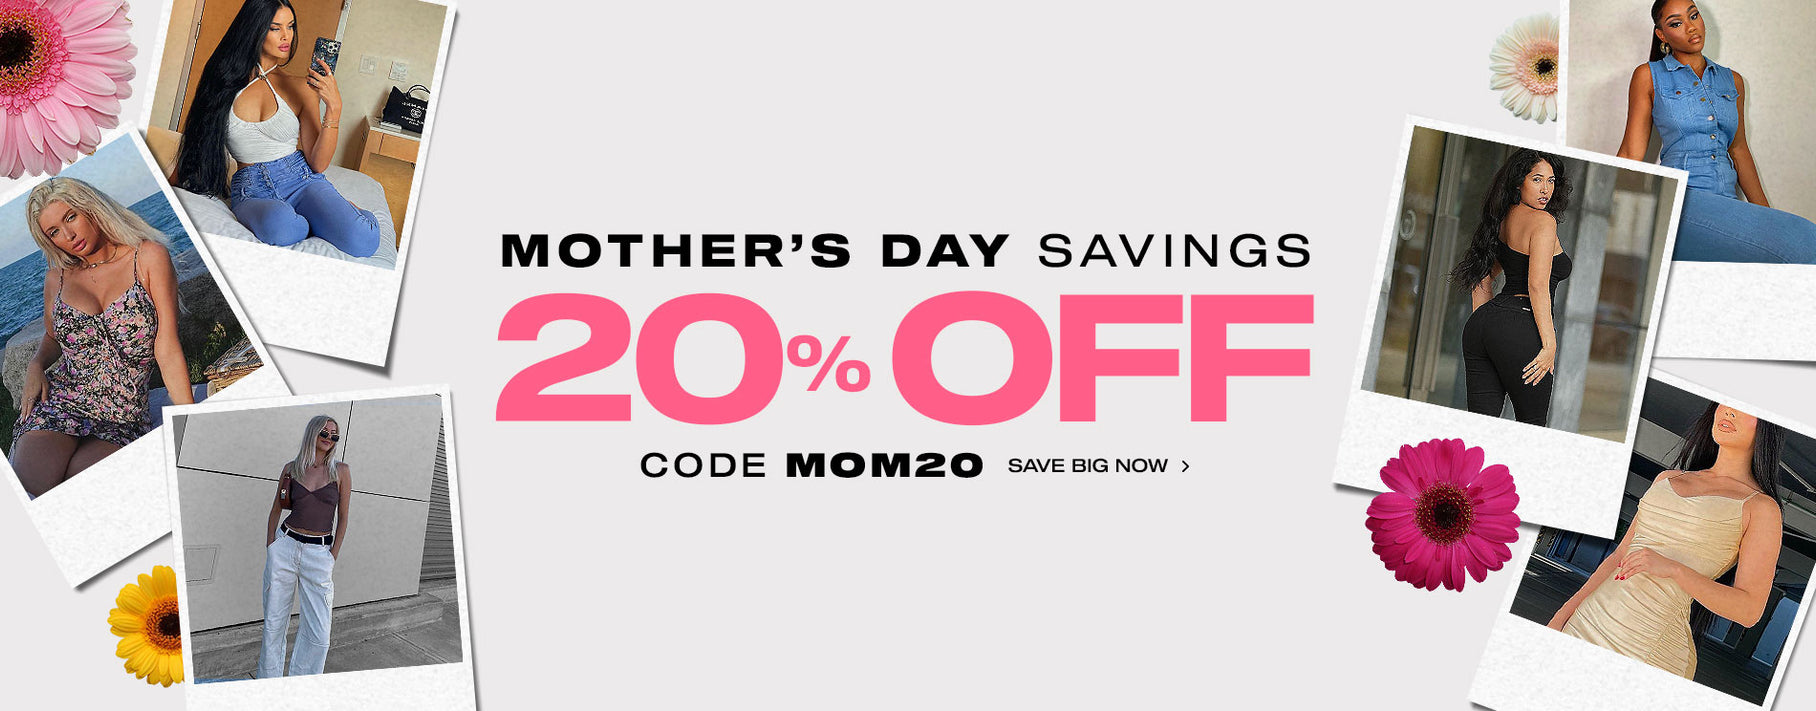 Mother's Day Saving: 20% Off Everything Code MOM20